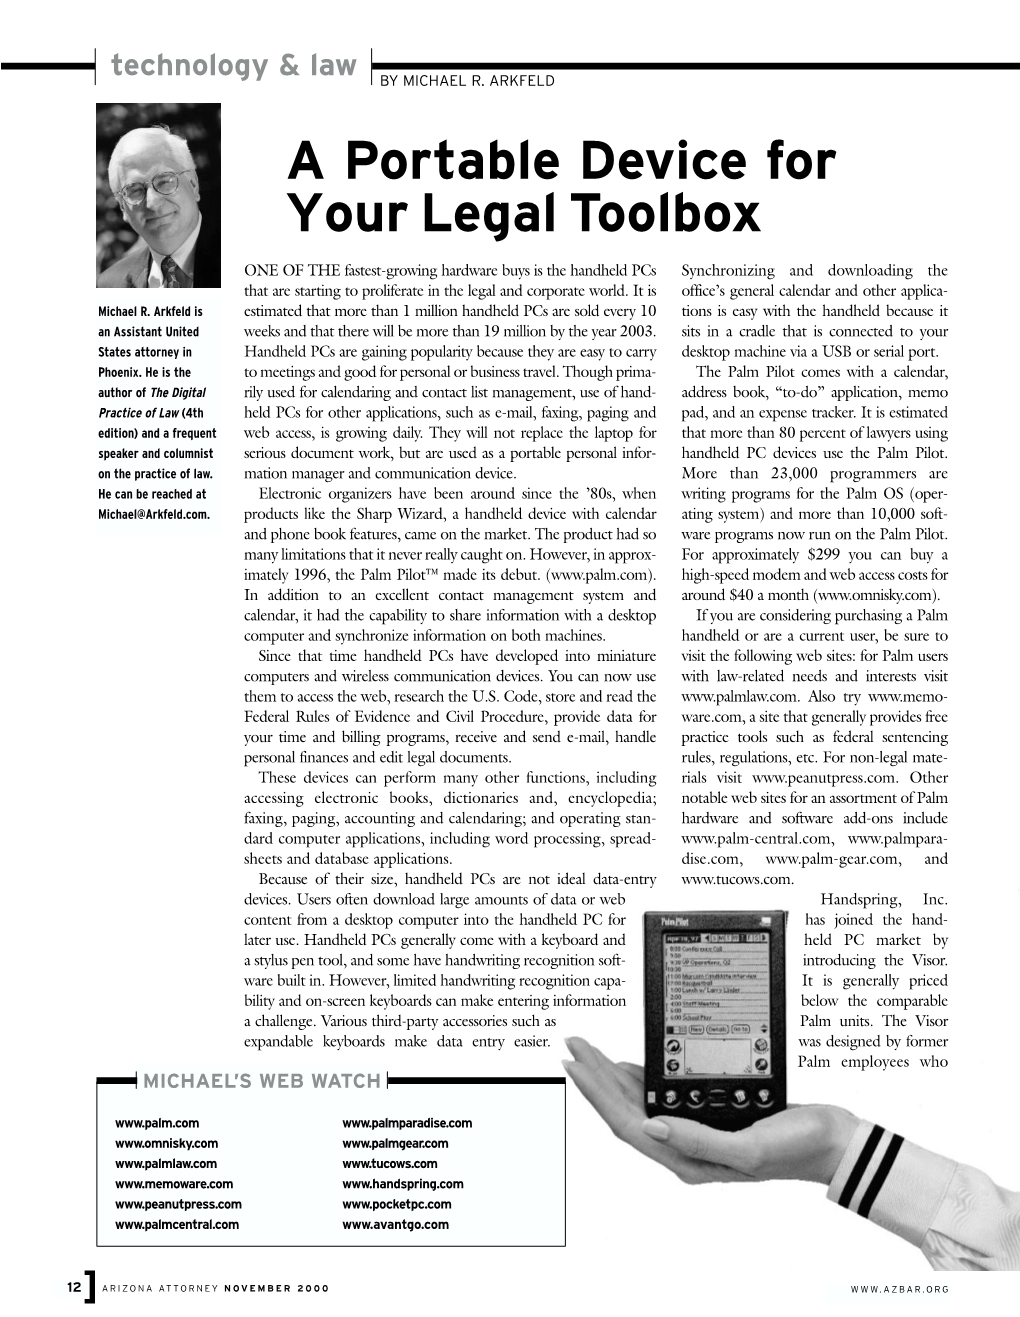 A Portable Device for Your Legal Toolbox